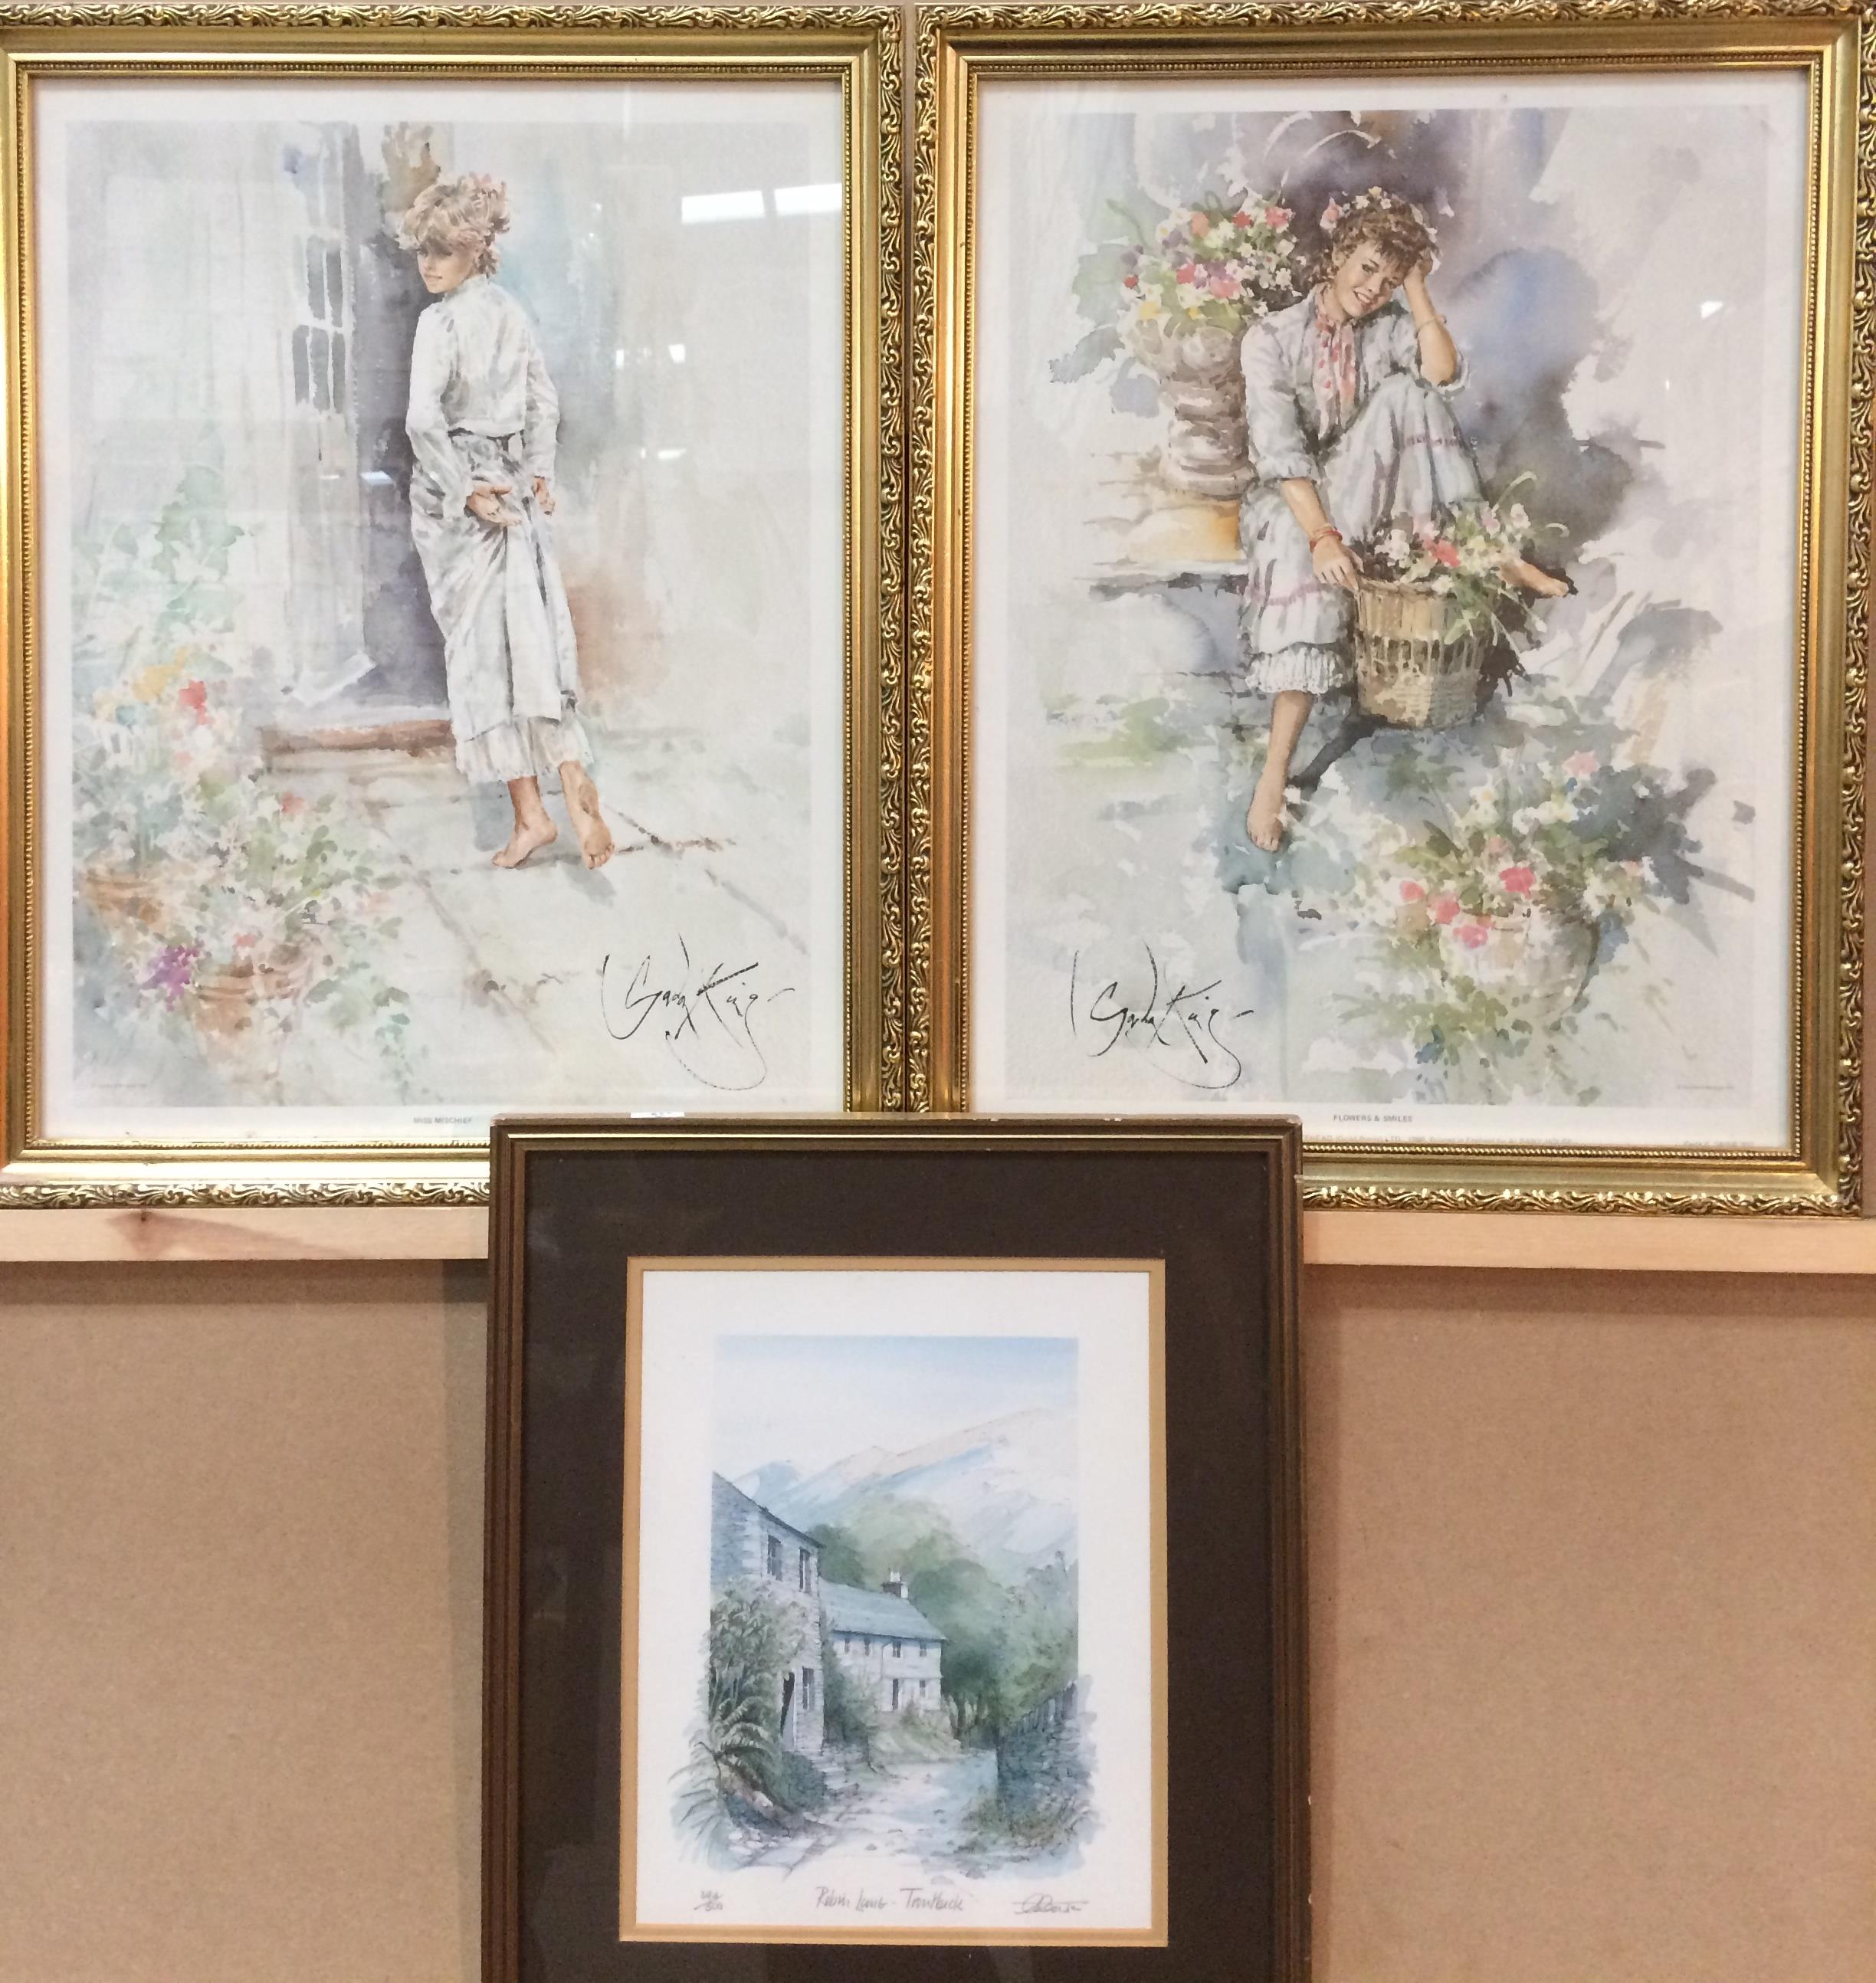 Gordon King two gilt framed prints - 'flowers and smiles' and 'Miss Mischief' both 45 x 34cm and a